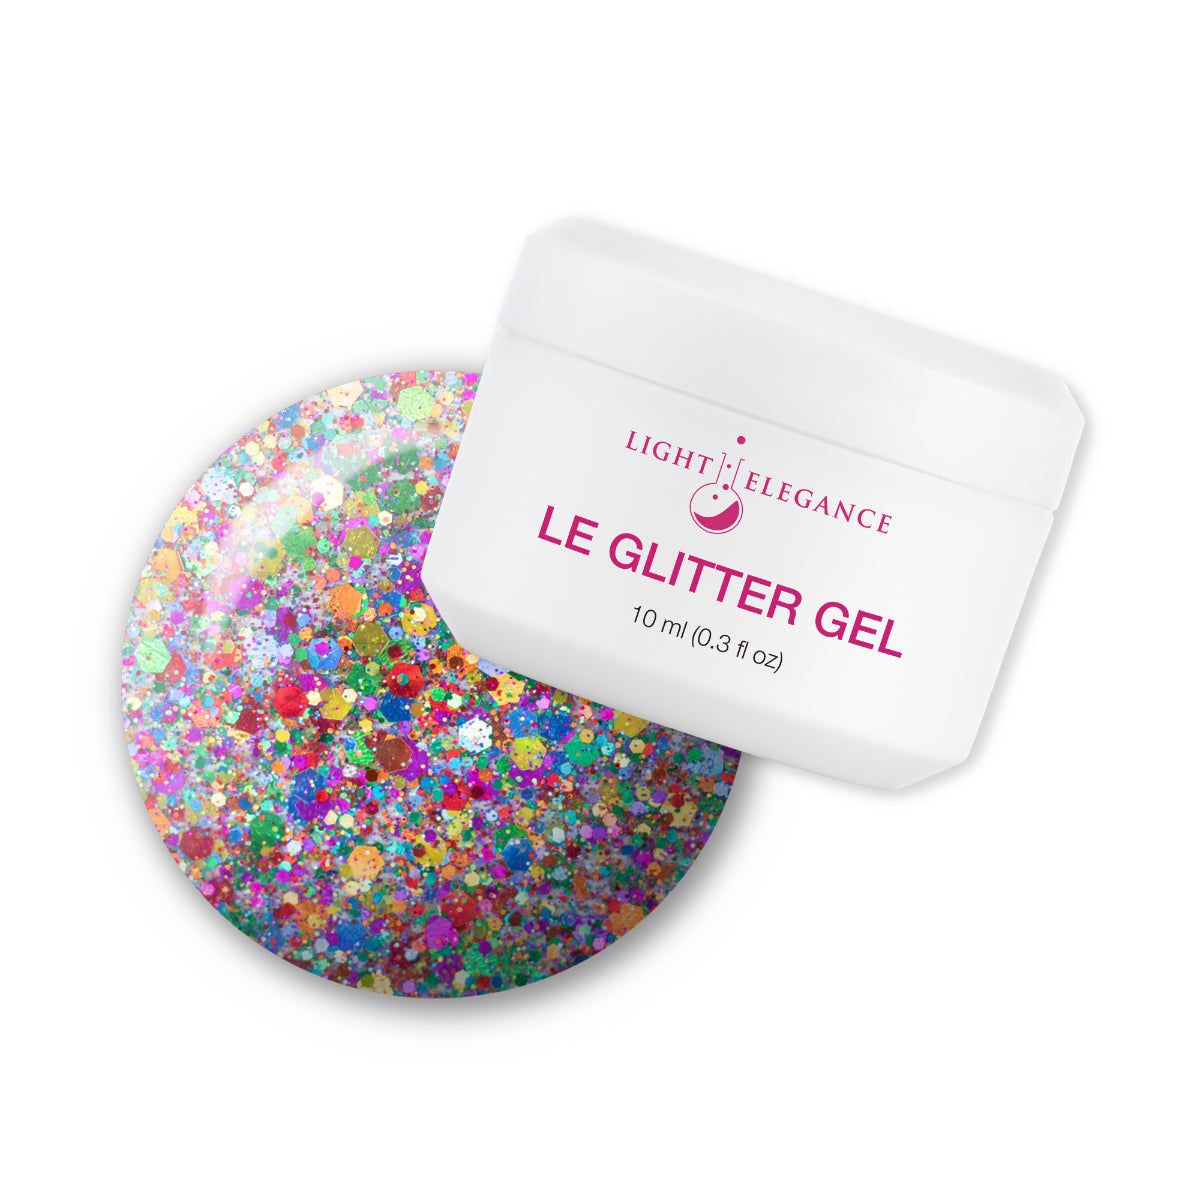 Light Elegance Glitter Gel - Everyone's a Critic :: New Packaging - Creata Beauty - Professional Beauty Products